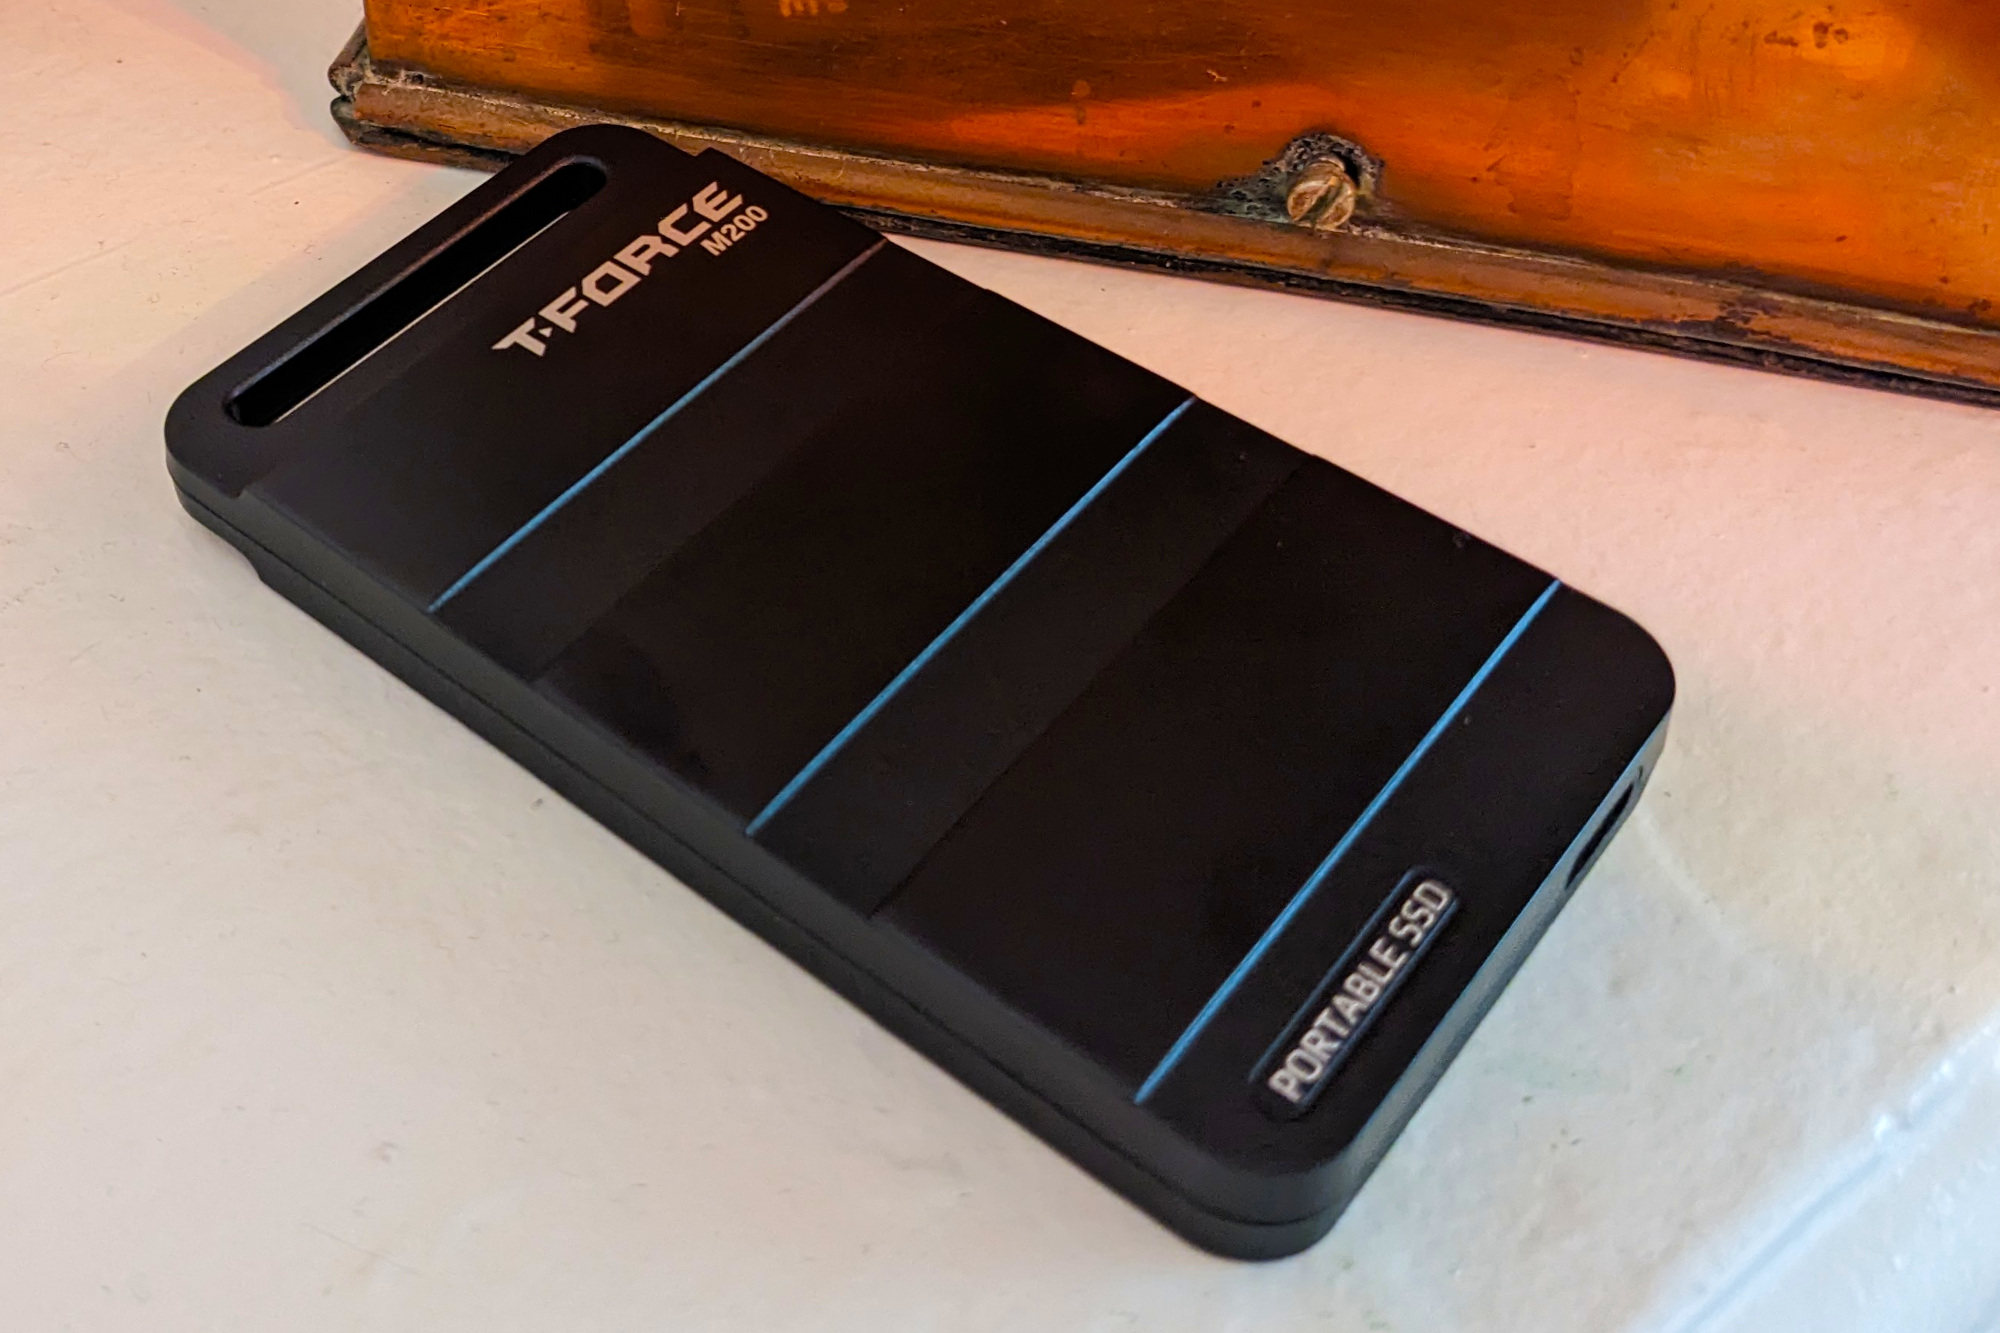 Teamgroup M200 portable SSD review: Fast, stylish, super